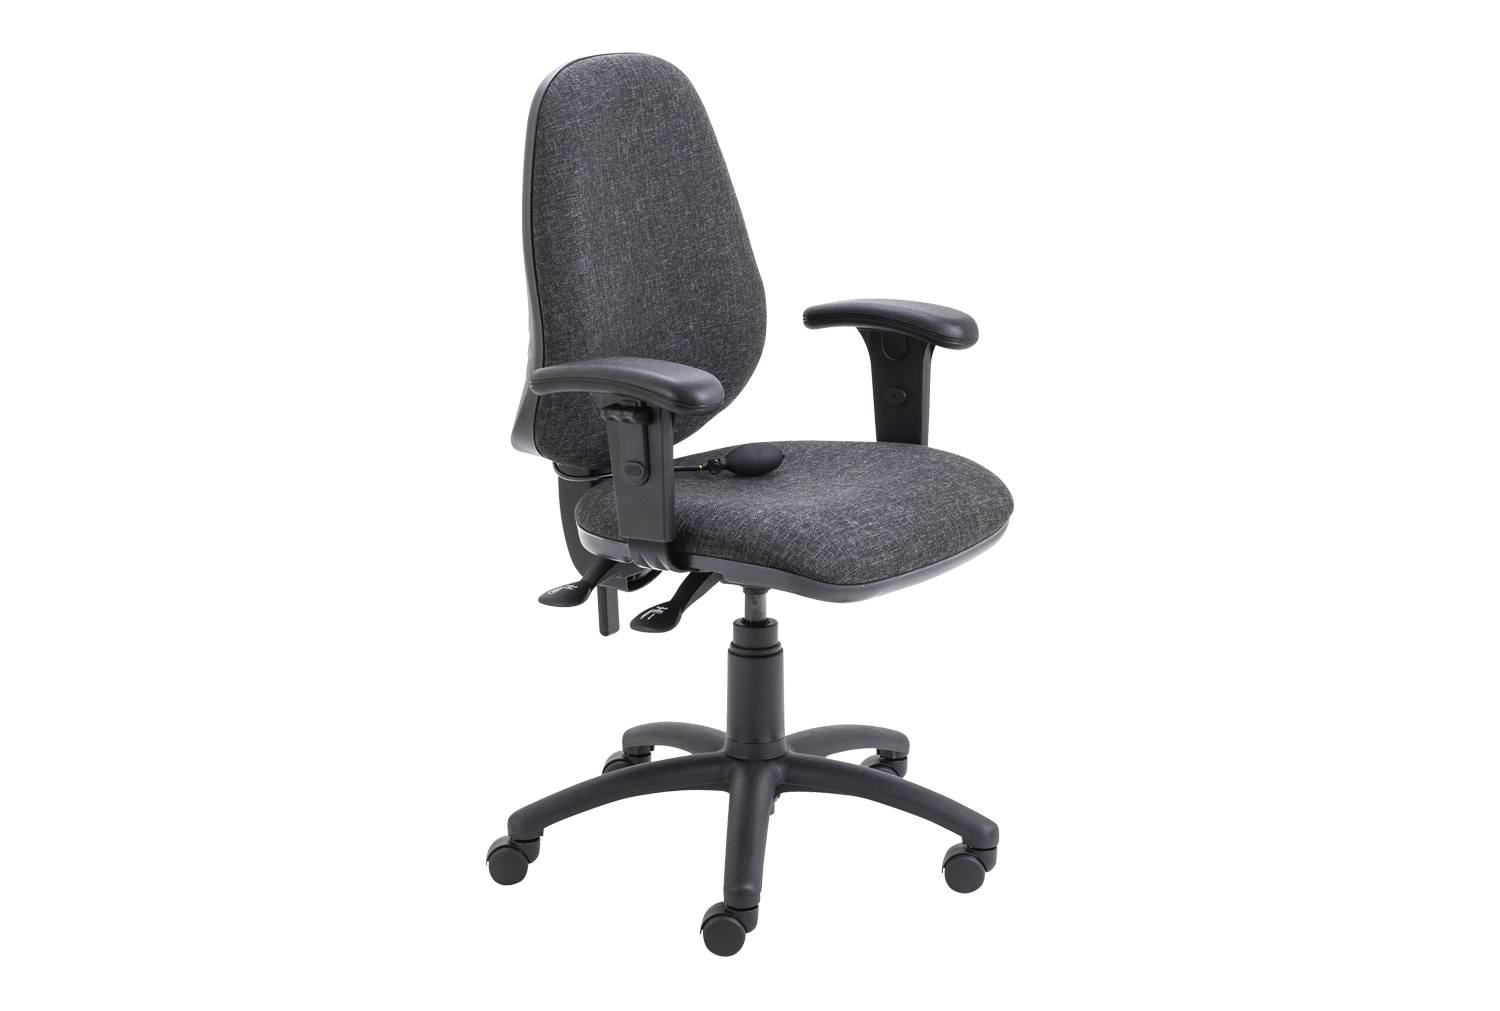 Orchid Lumbar Pump Ergonomic Operator Office Chair With Height Adjustable Arms, Charcoal, Express Delivery